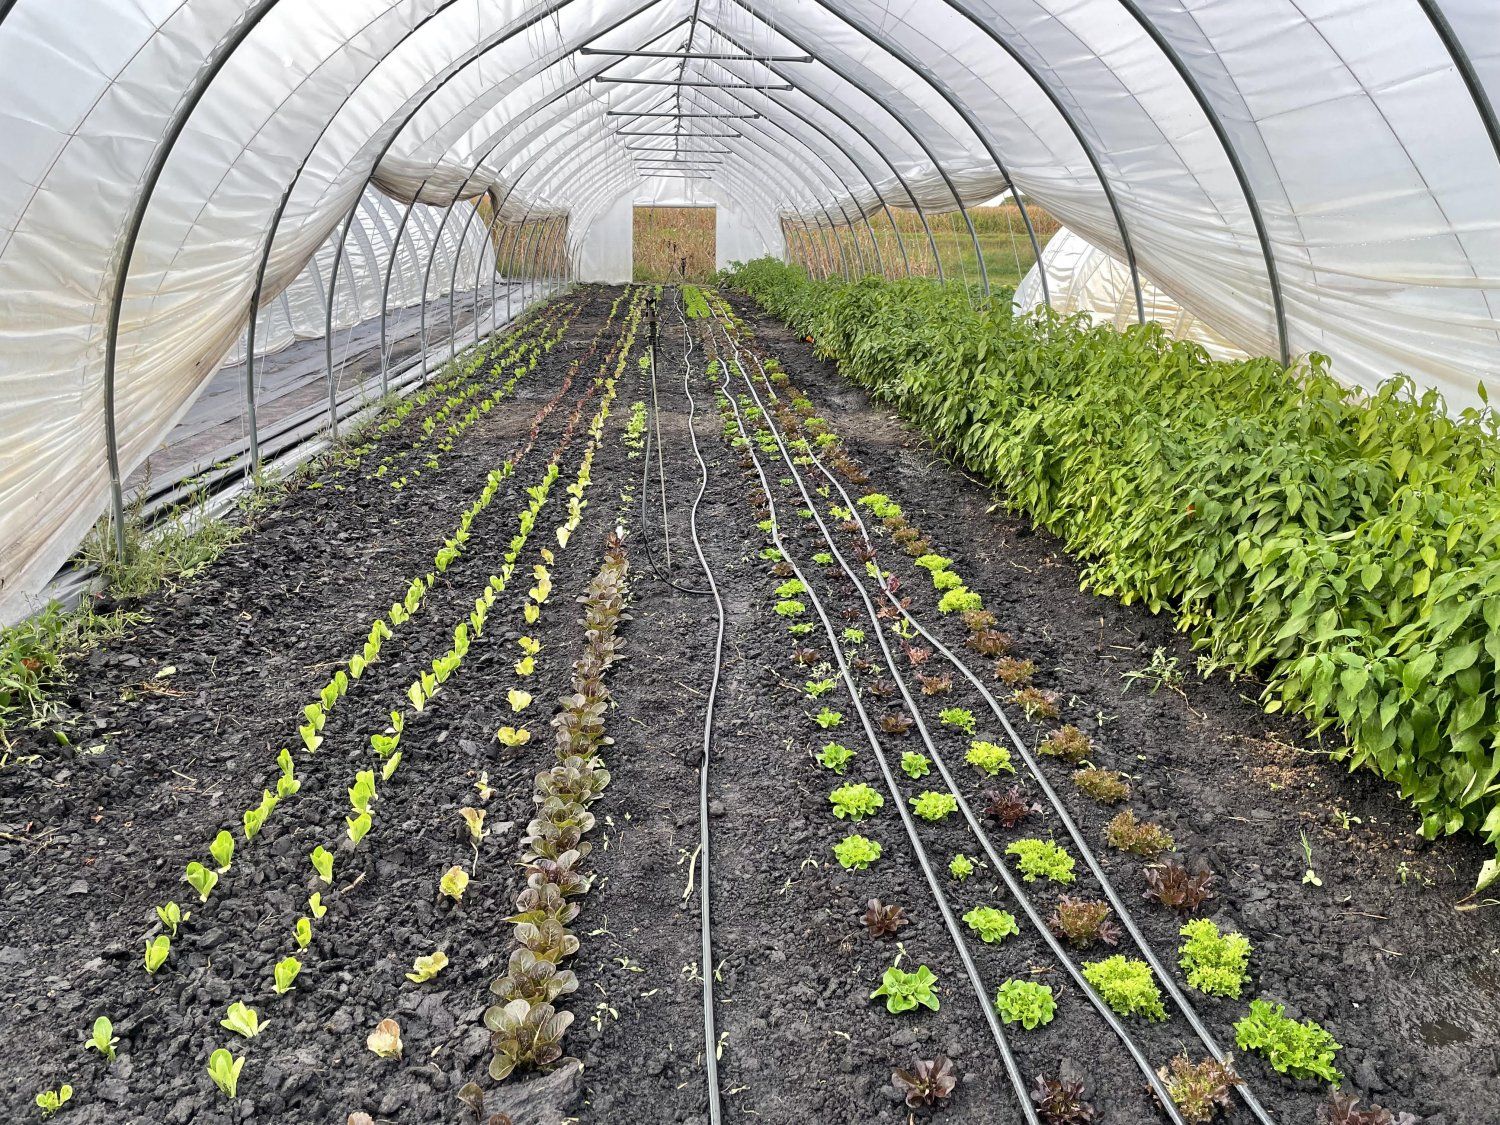 Next Happening: Winter Crops Into the Tunnels